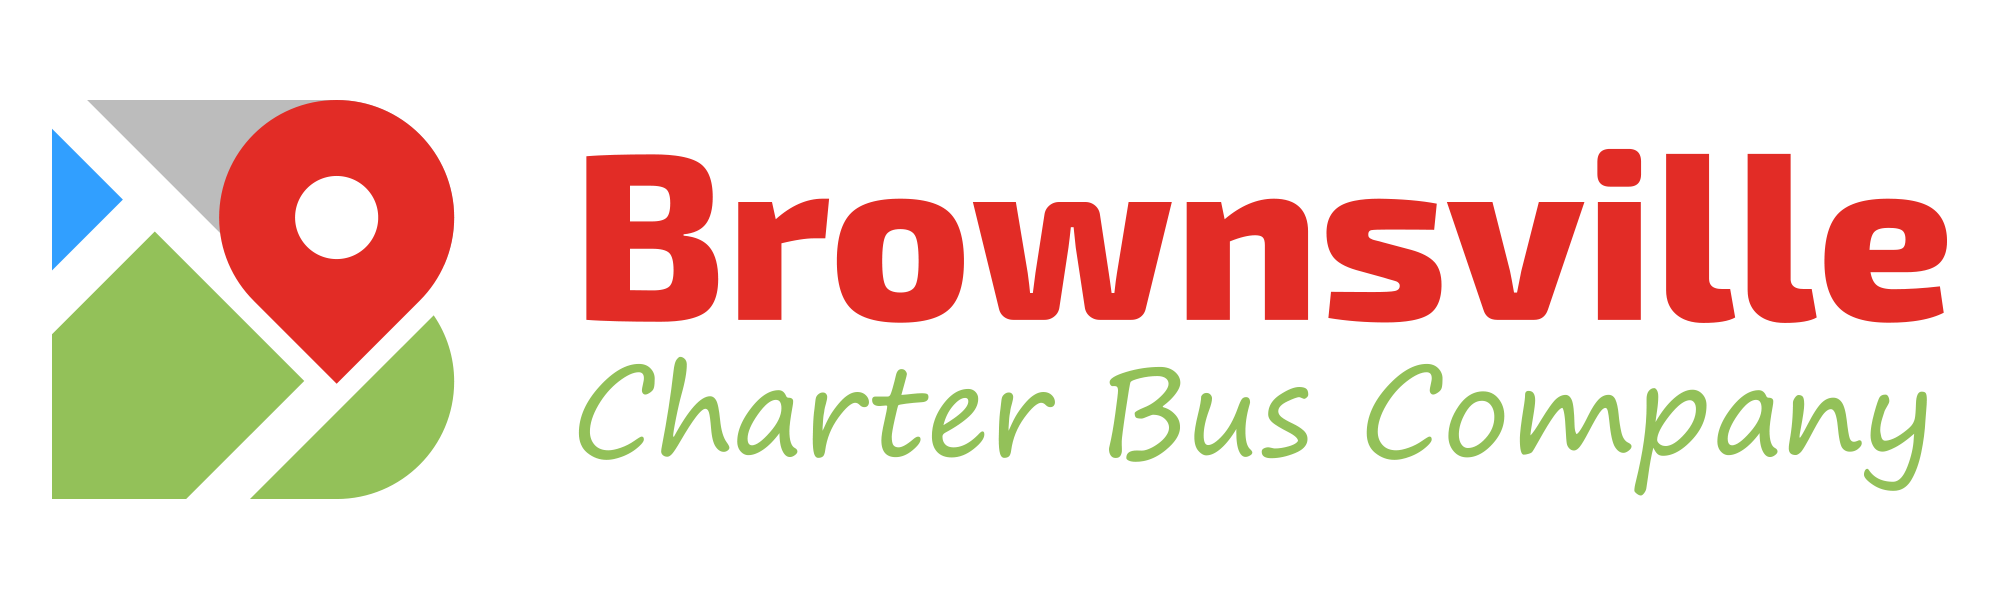 Brownsville Charter Bus Company